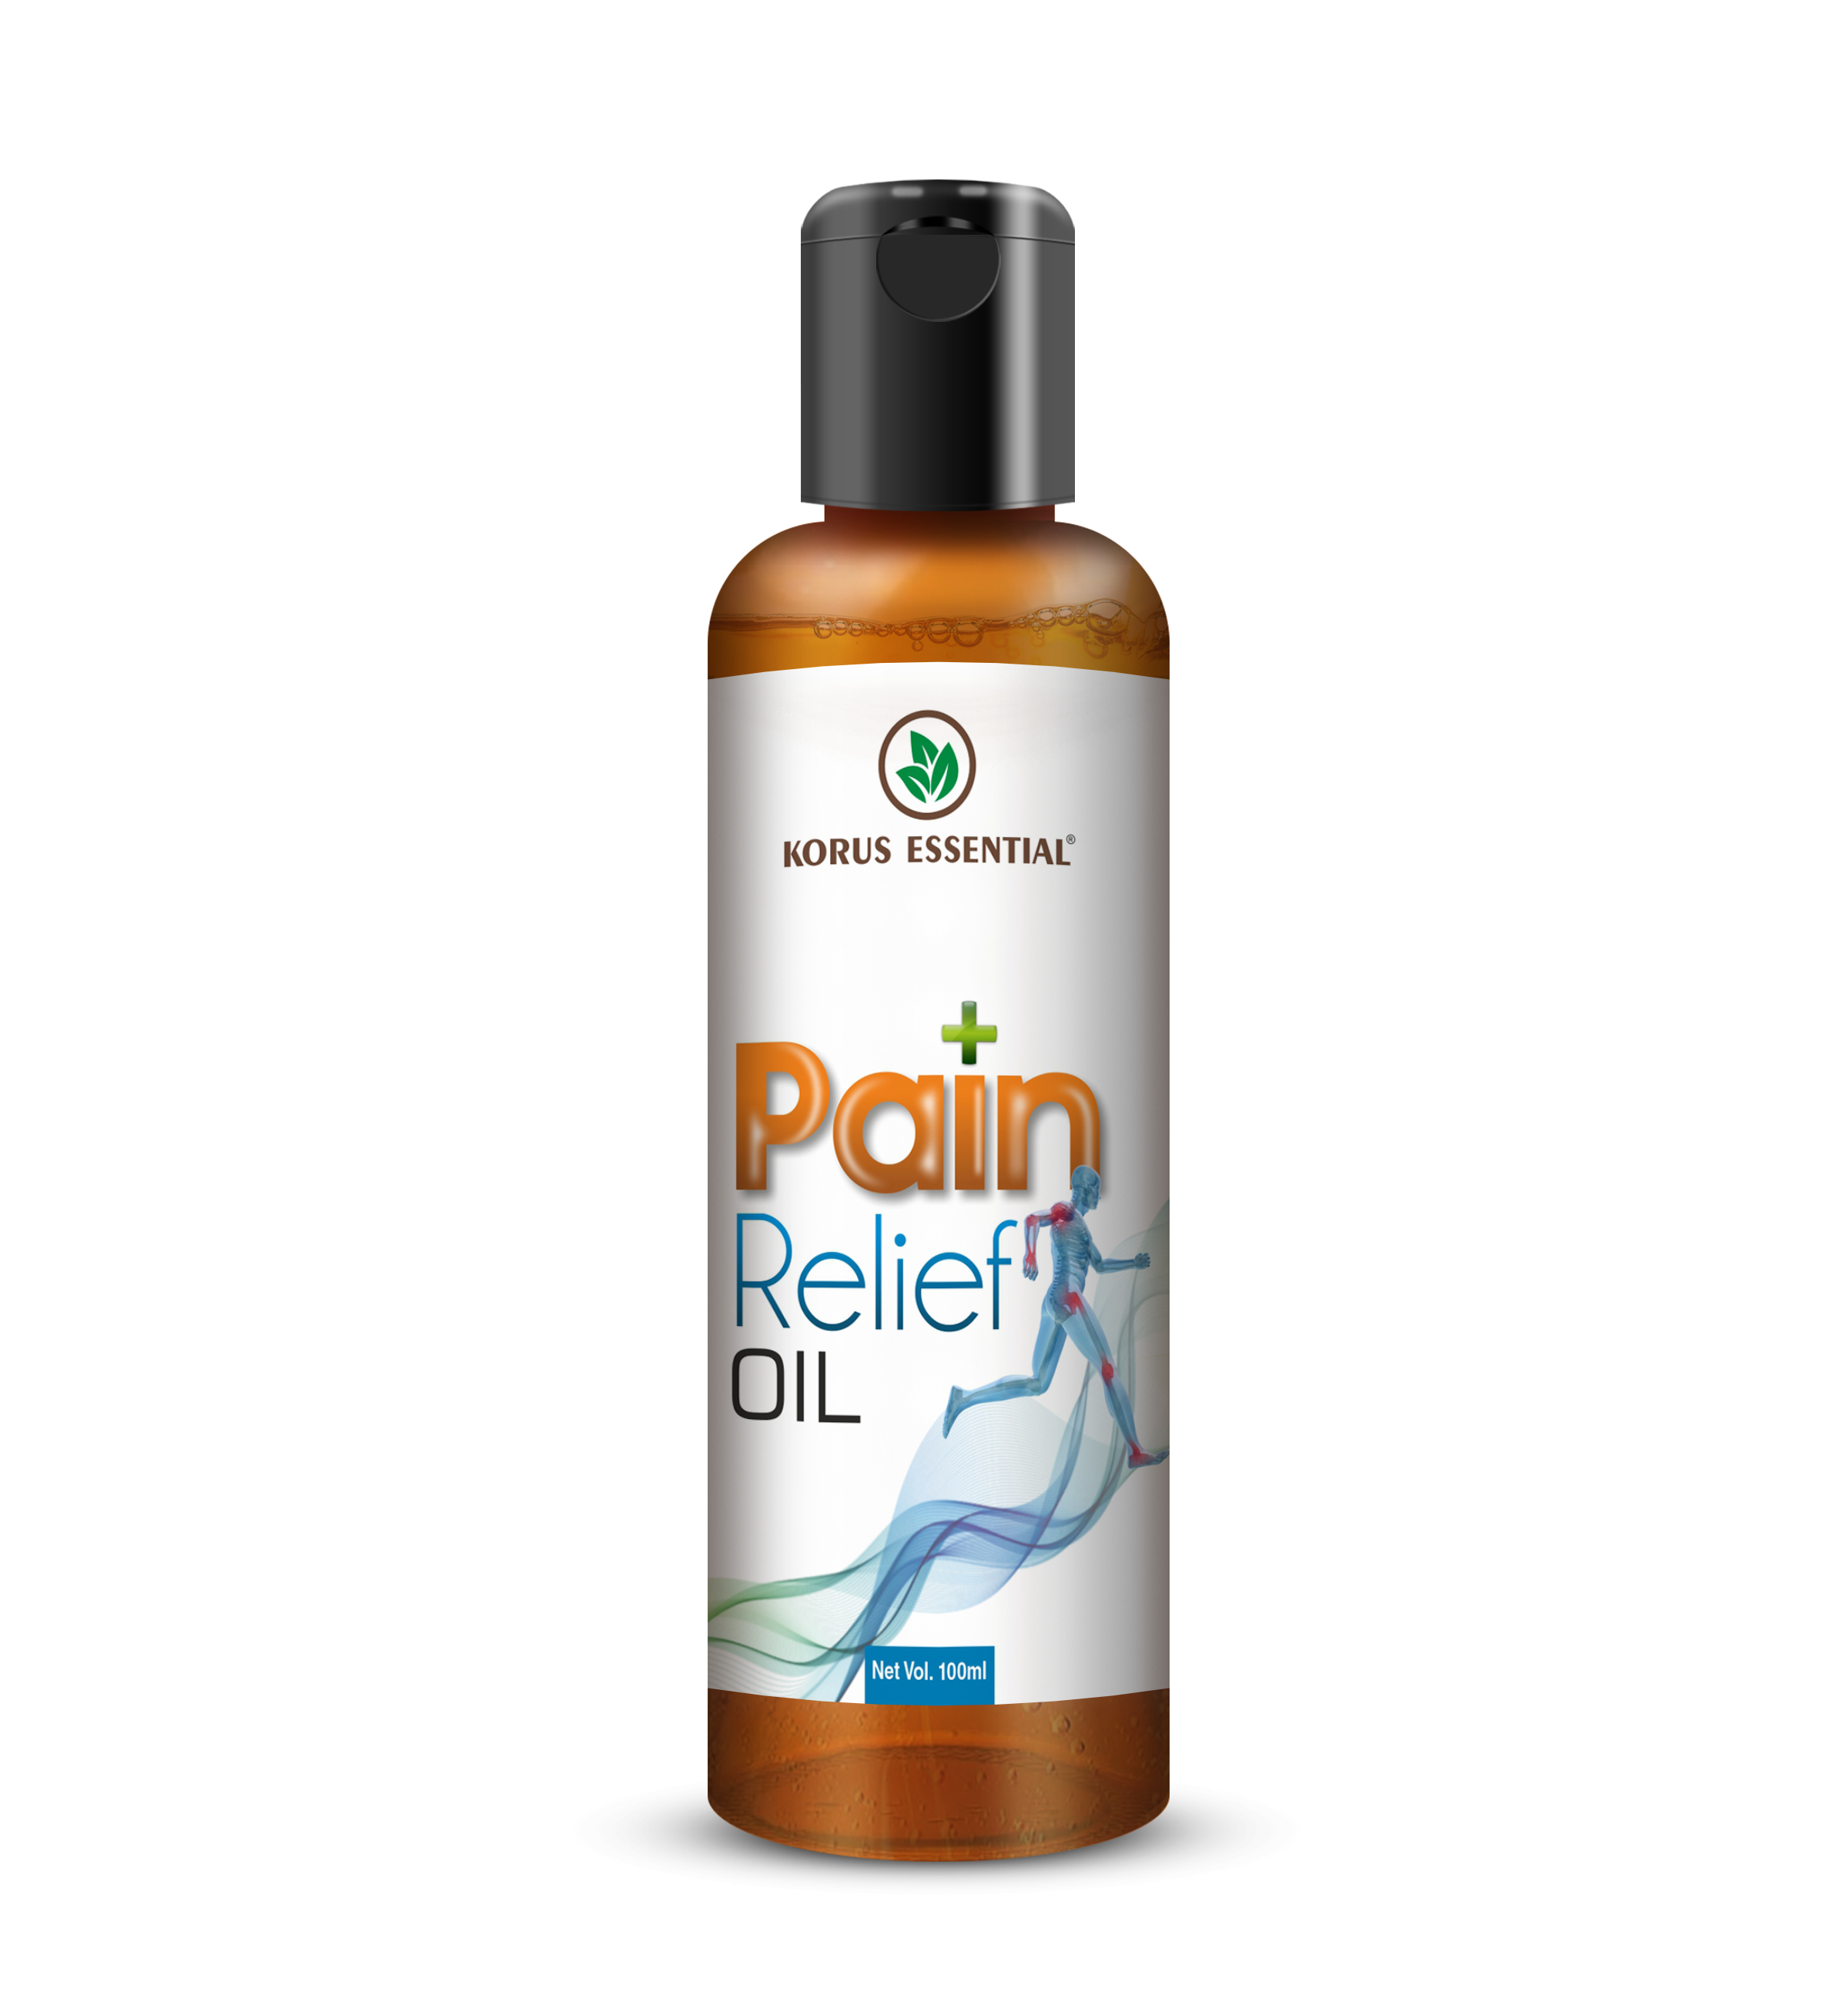 Pain Relief Oil 100ml by Korus Essential